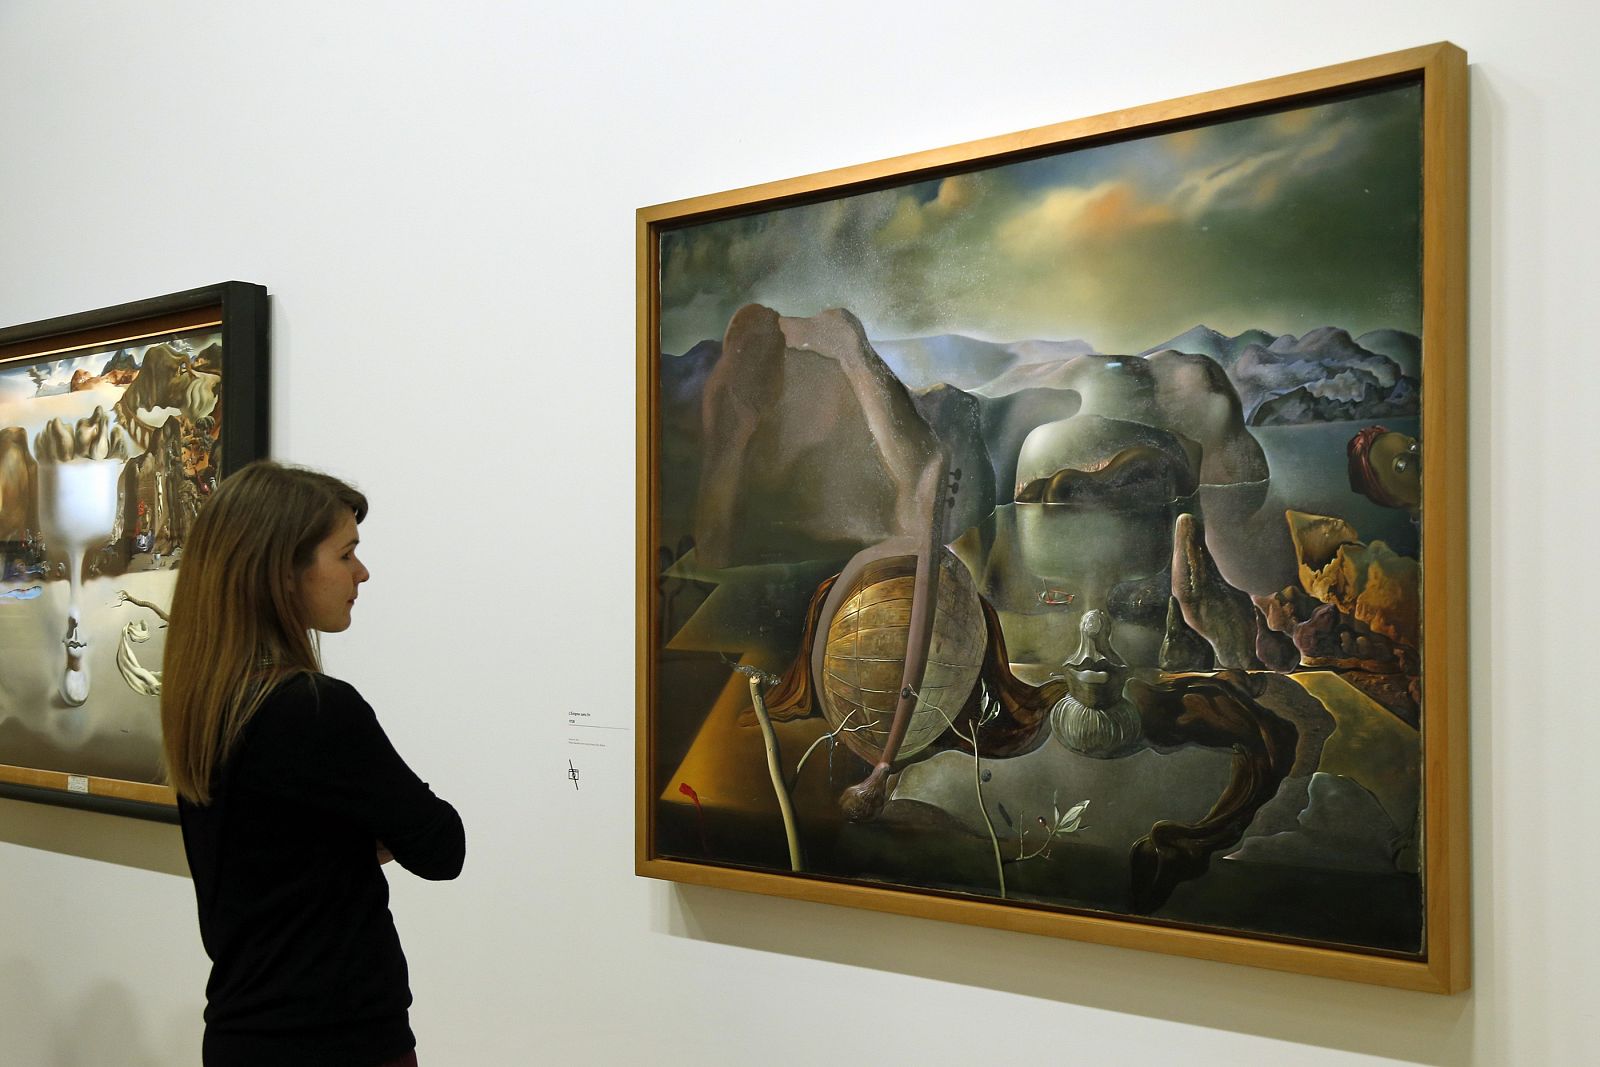 A visitor looks at a painting by Salvador Dali during a press visit of the exhibition "Dali" at the Centre Pompidou modern art museum in Paris